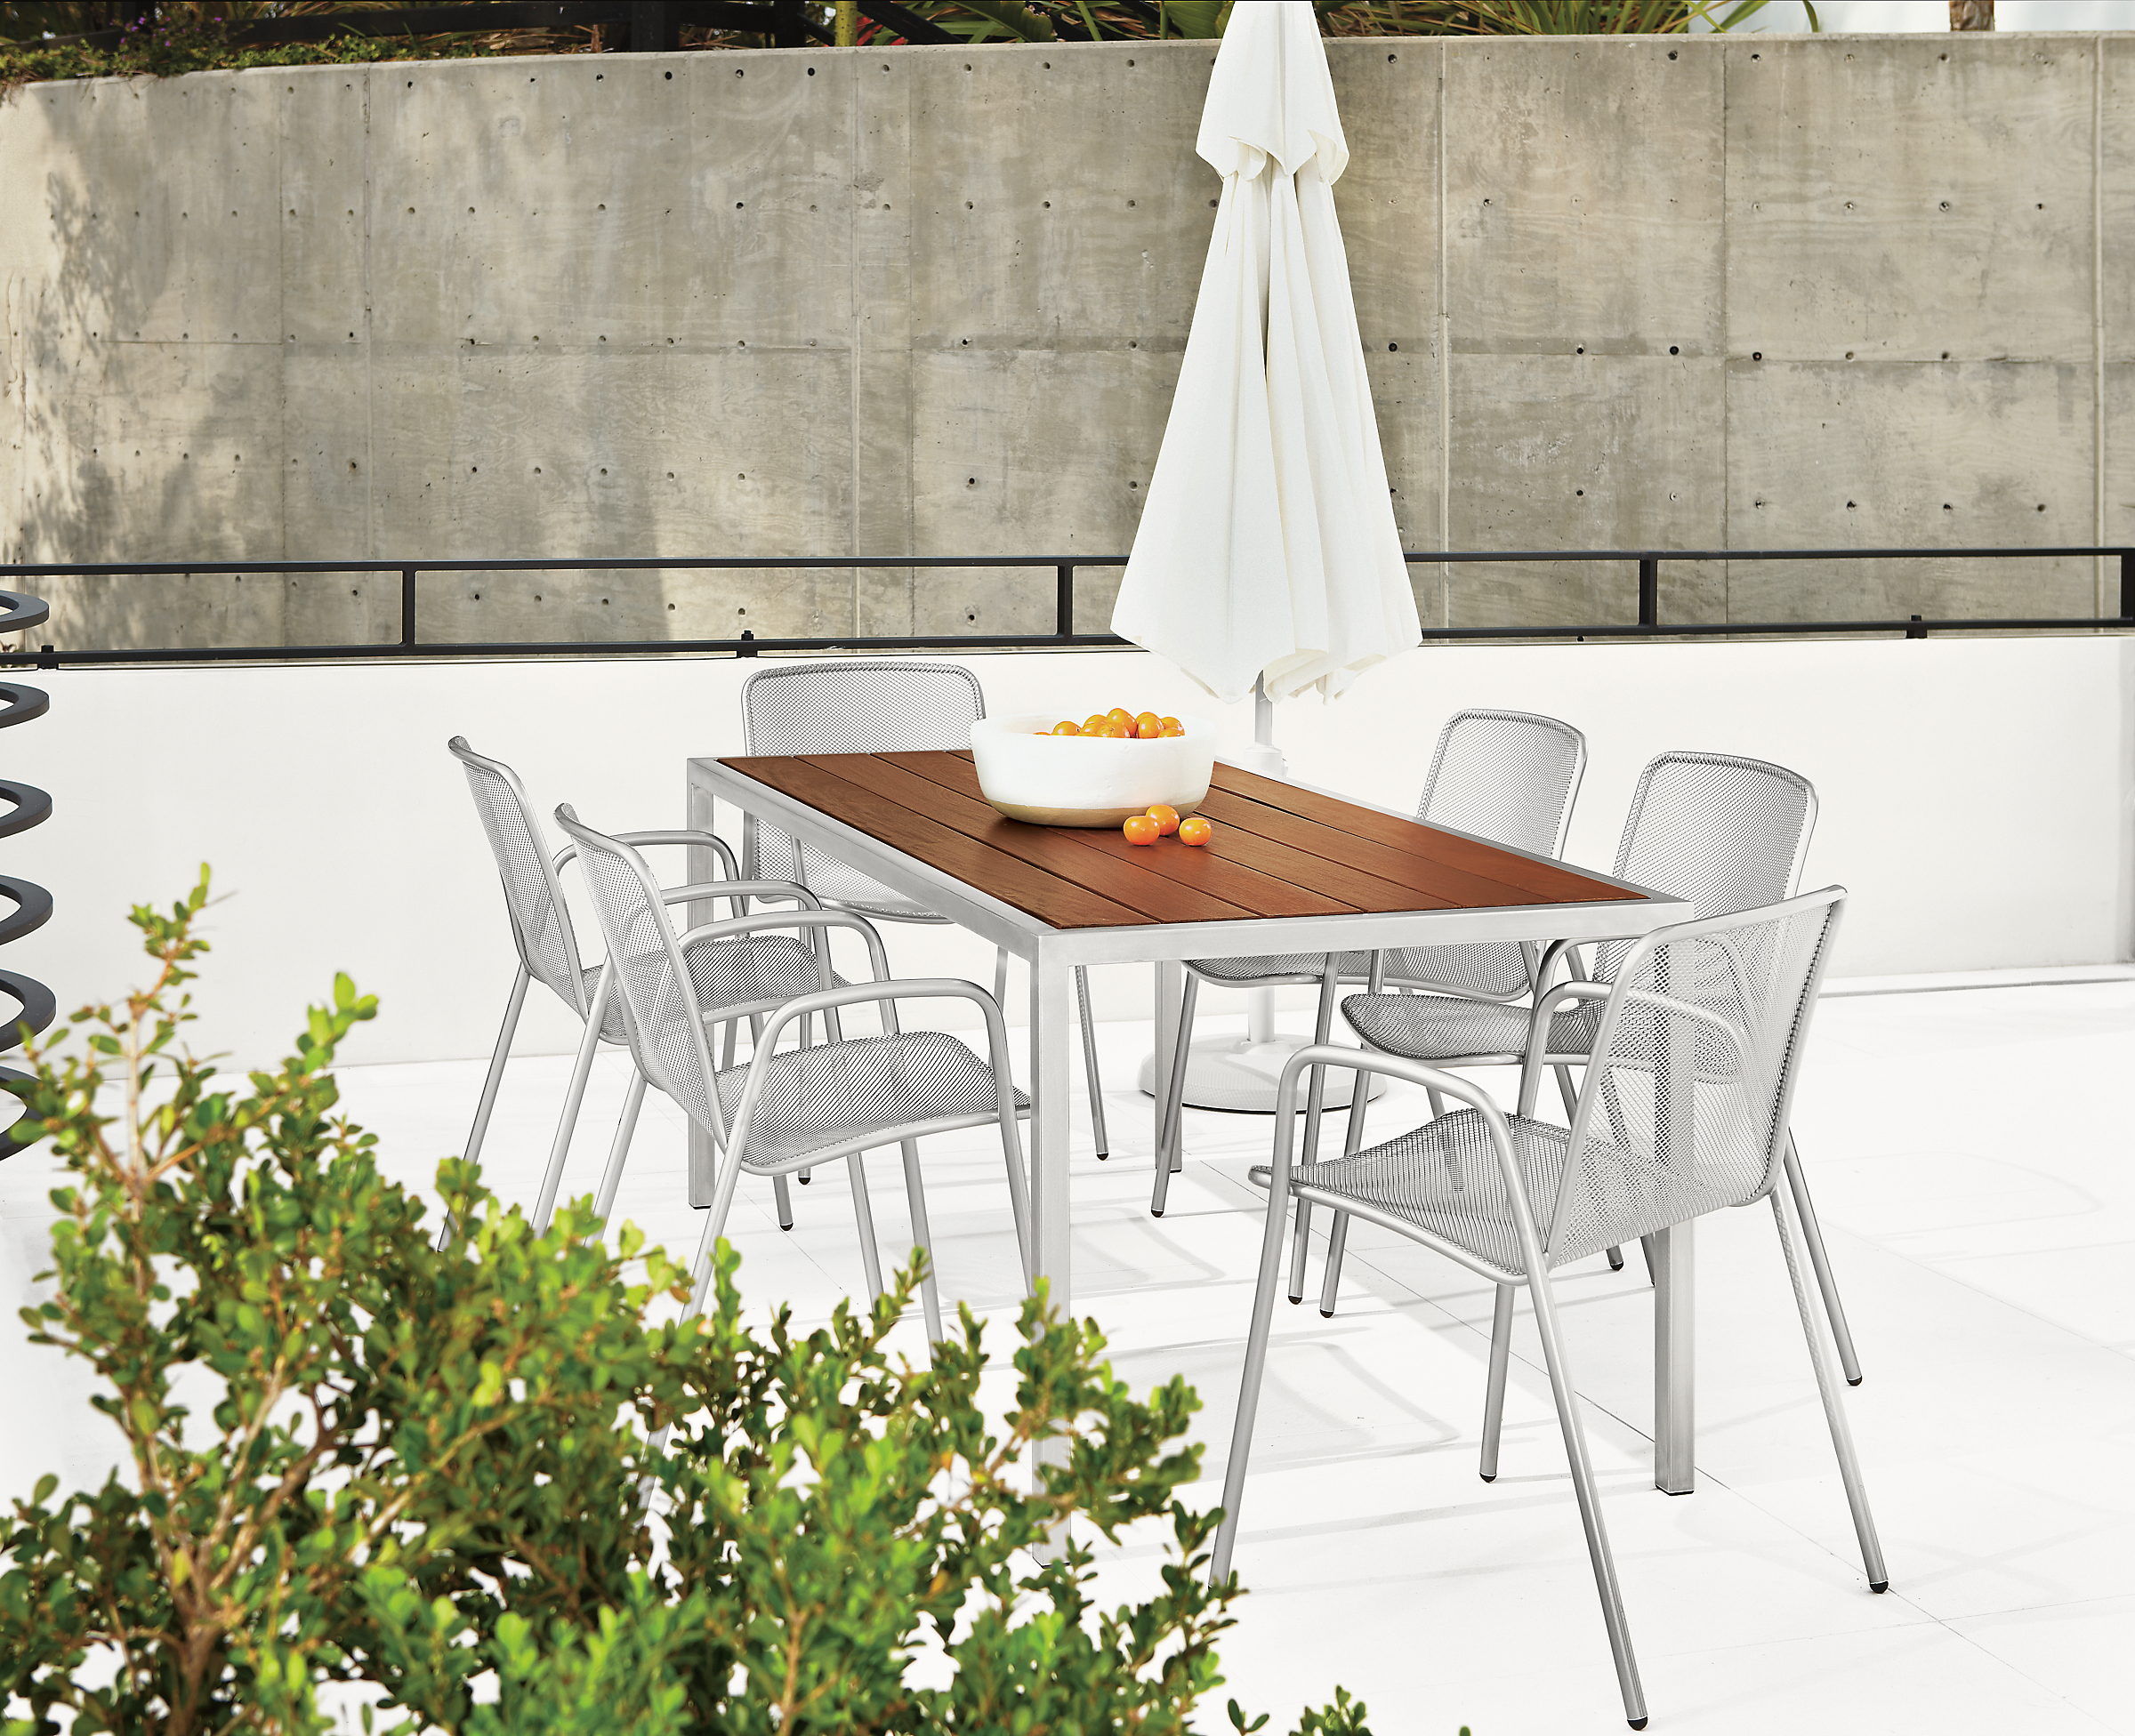 Patio with Montego dining table in stainless steel.